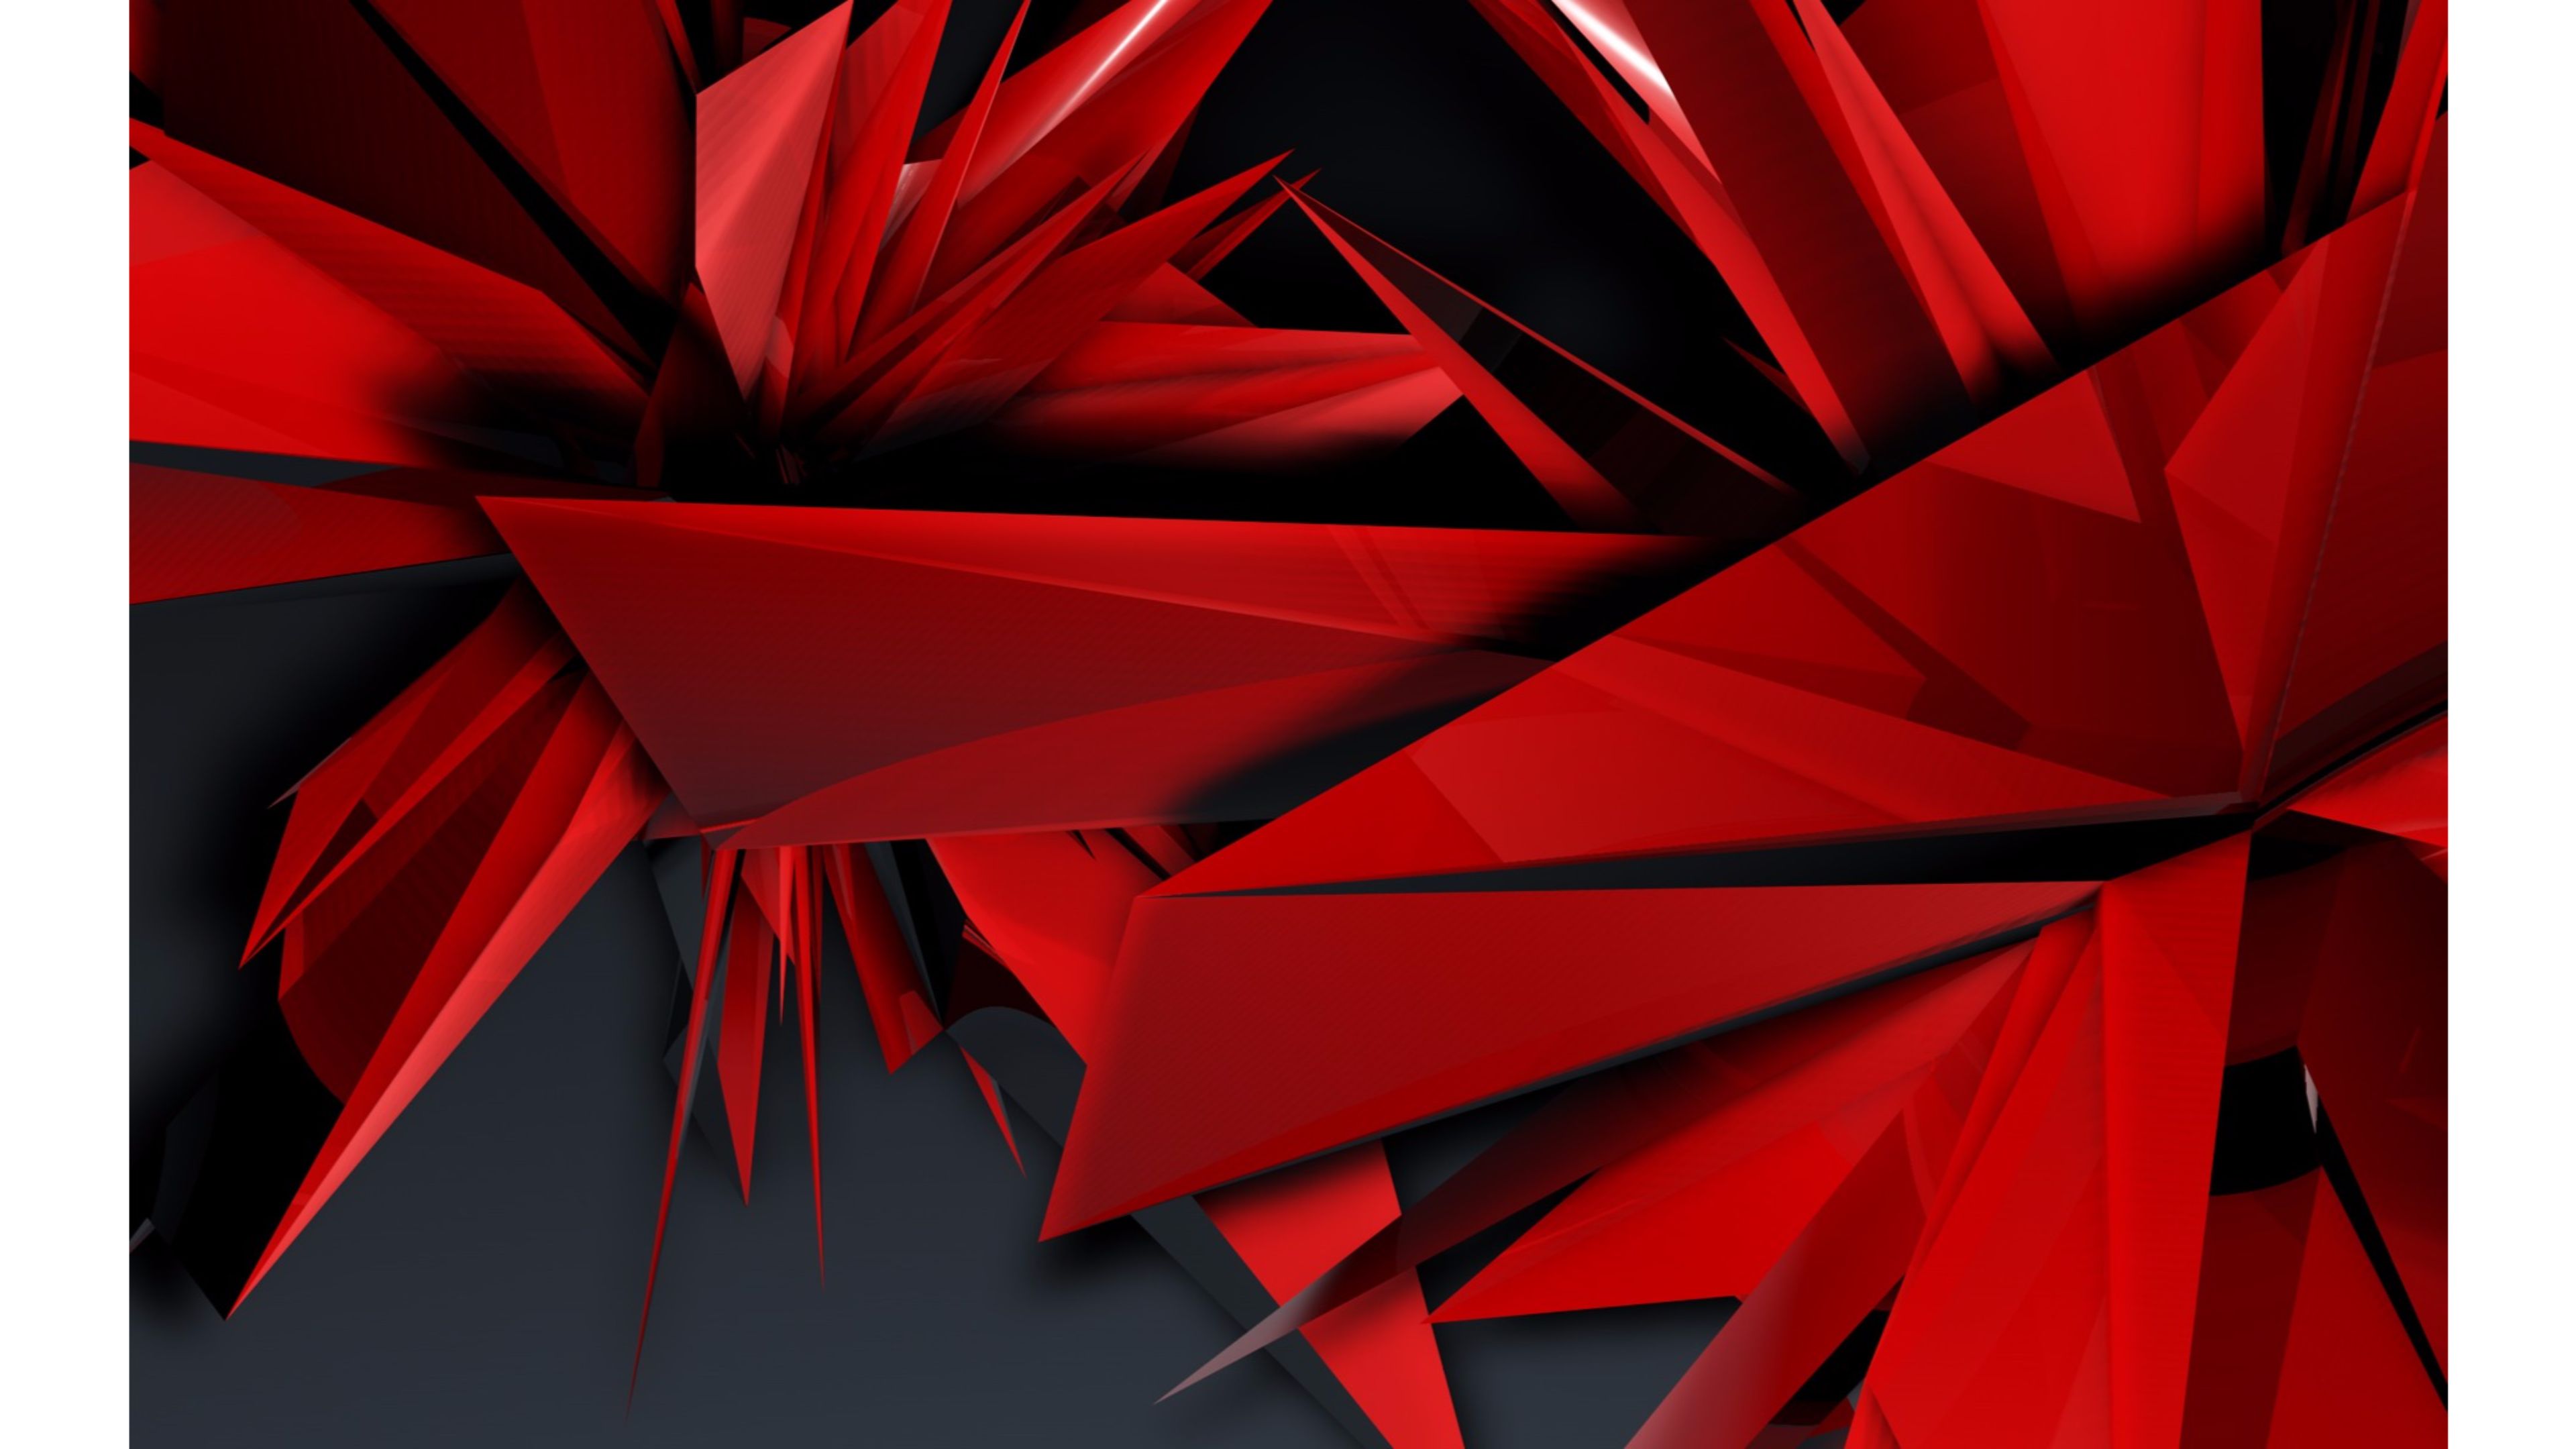 Weird Shapes Abstract S Wallpaper - High Resolution Red Abstract - HD Wallpaper 